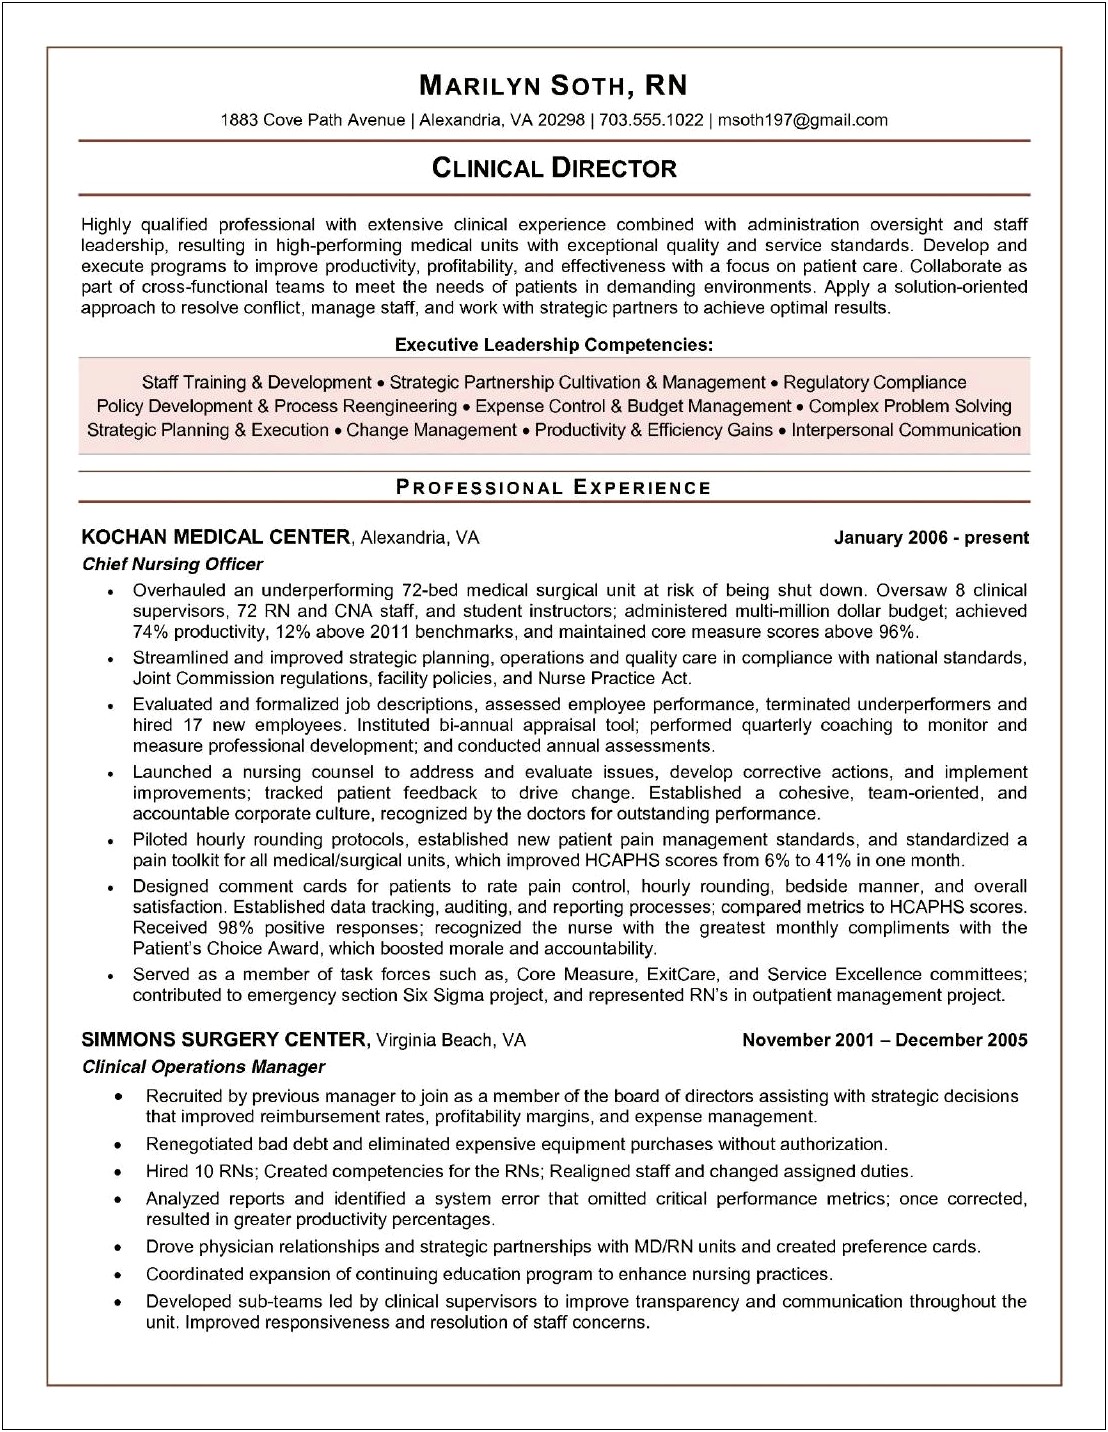 Resume Objective Statements For Problem And Change Management